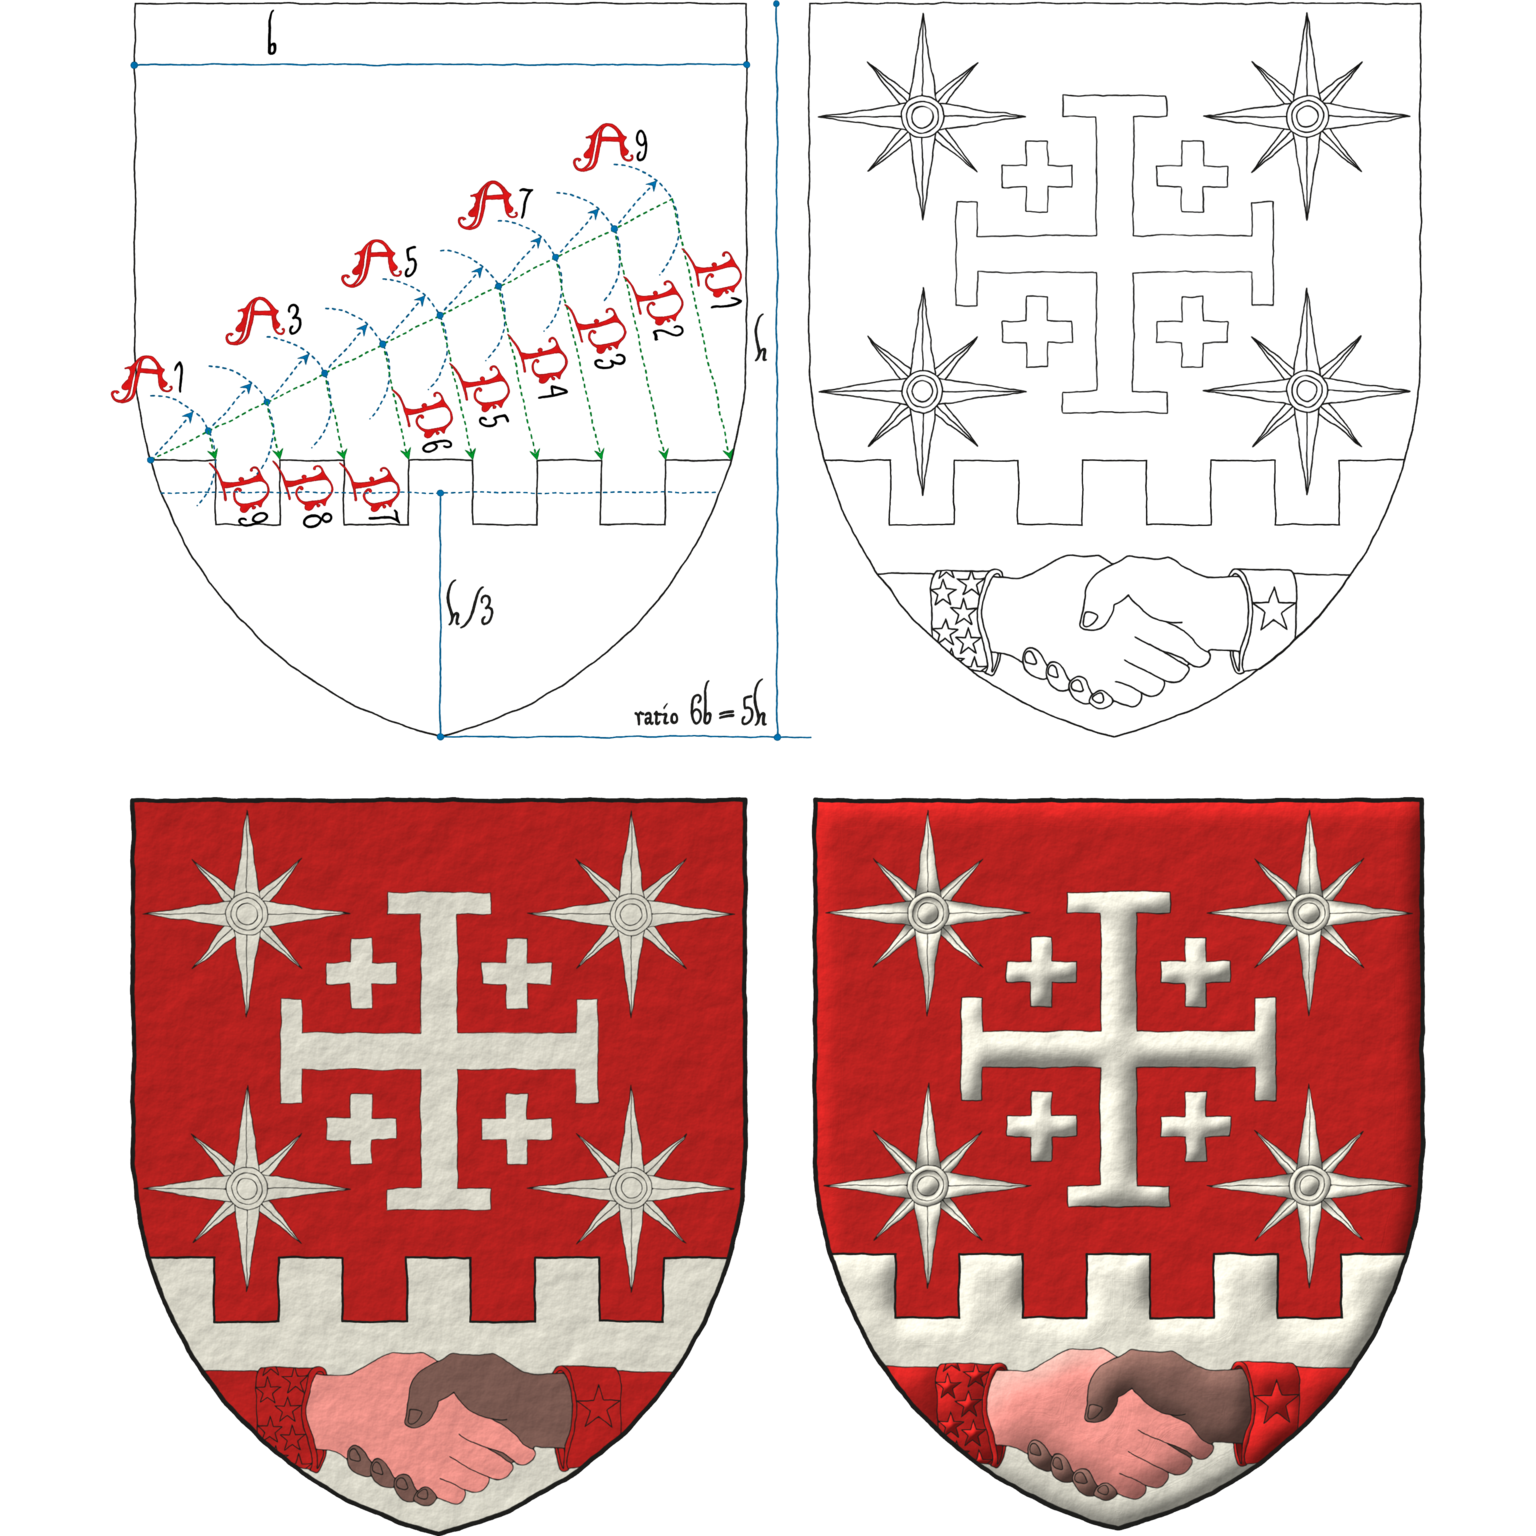 Coat of arms of Danny B. Warner emblazoned by me in 4 steps: geometrical sketch, outlined, plain tinctures and lights and shadows. Blazon: Sanguine, a cross potent cantoned of crosslets between four compass roses, 2, 2, and on a base embattled Argent two hands clasped, the dexter Carnation the sinister Brown, both vested Sanguine.